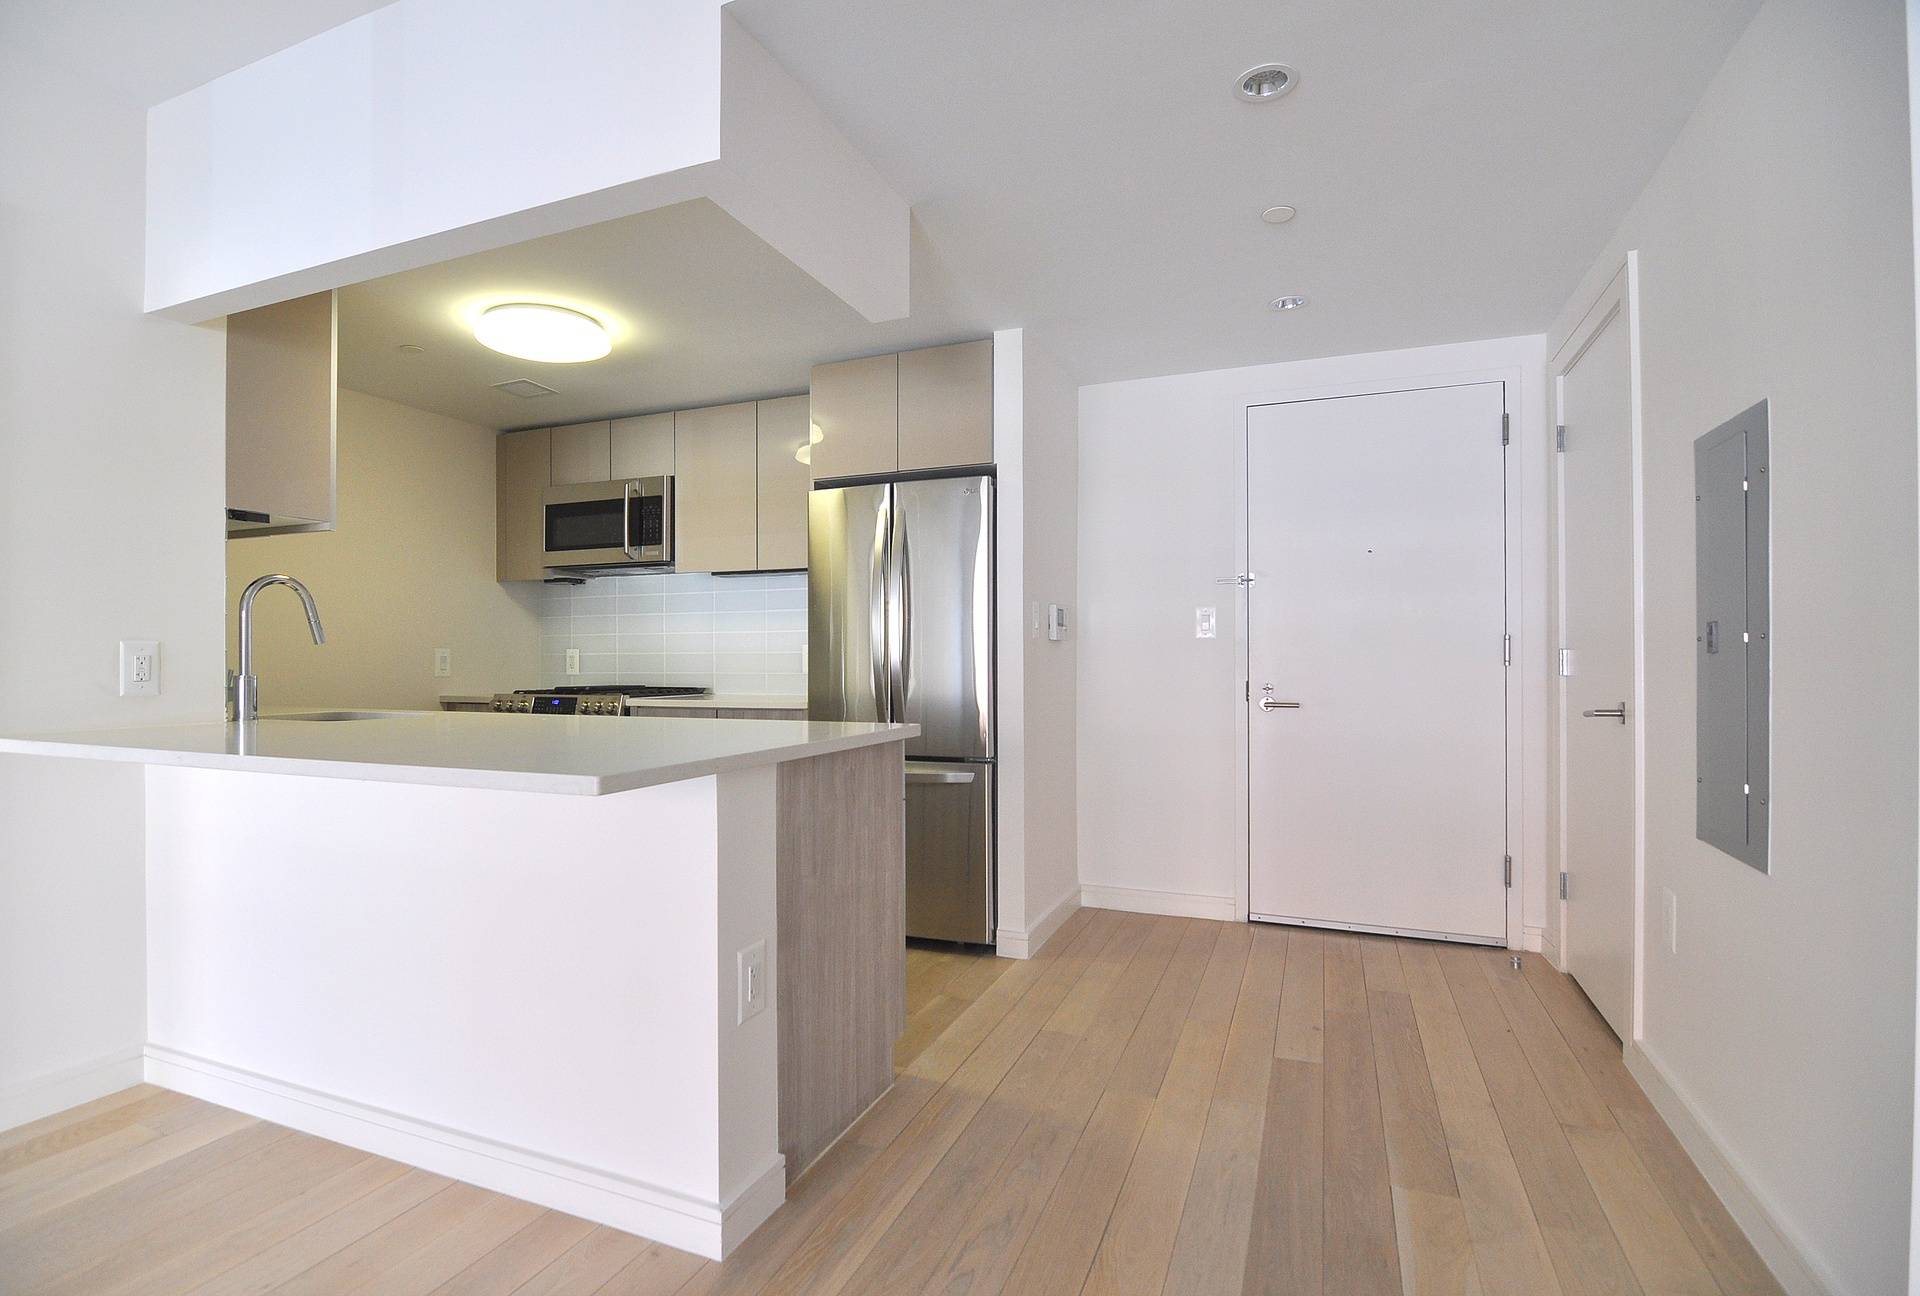 Split Two Bed Two Bath in a Brand New Luxury Condo in Harlem!